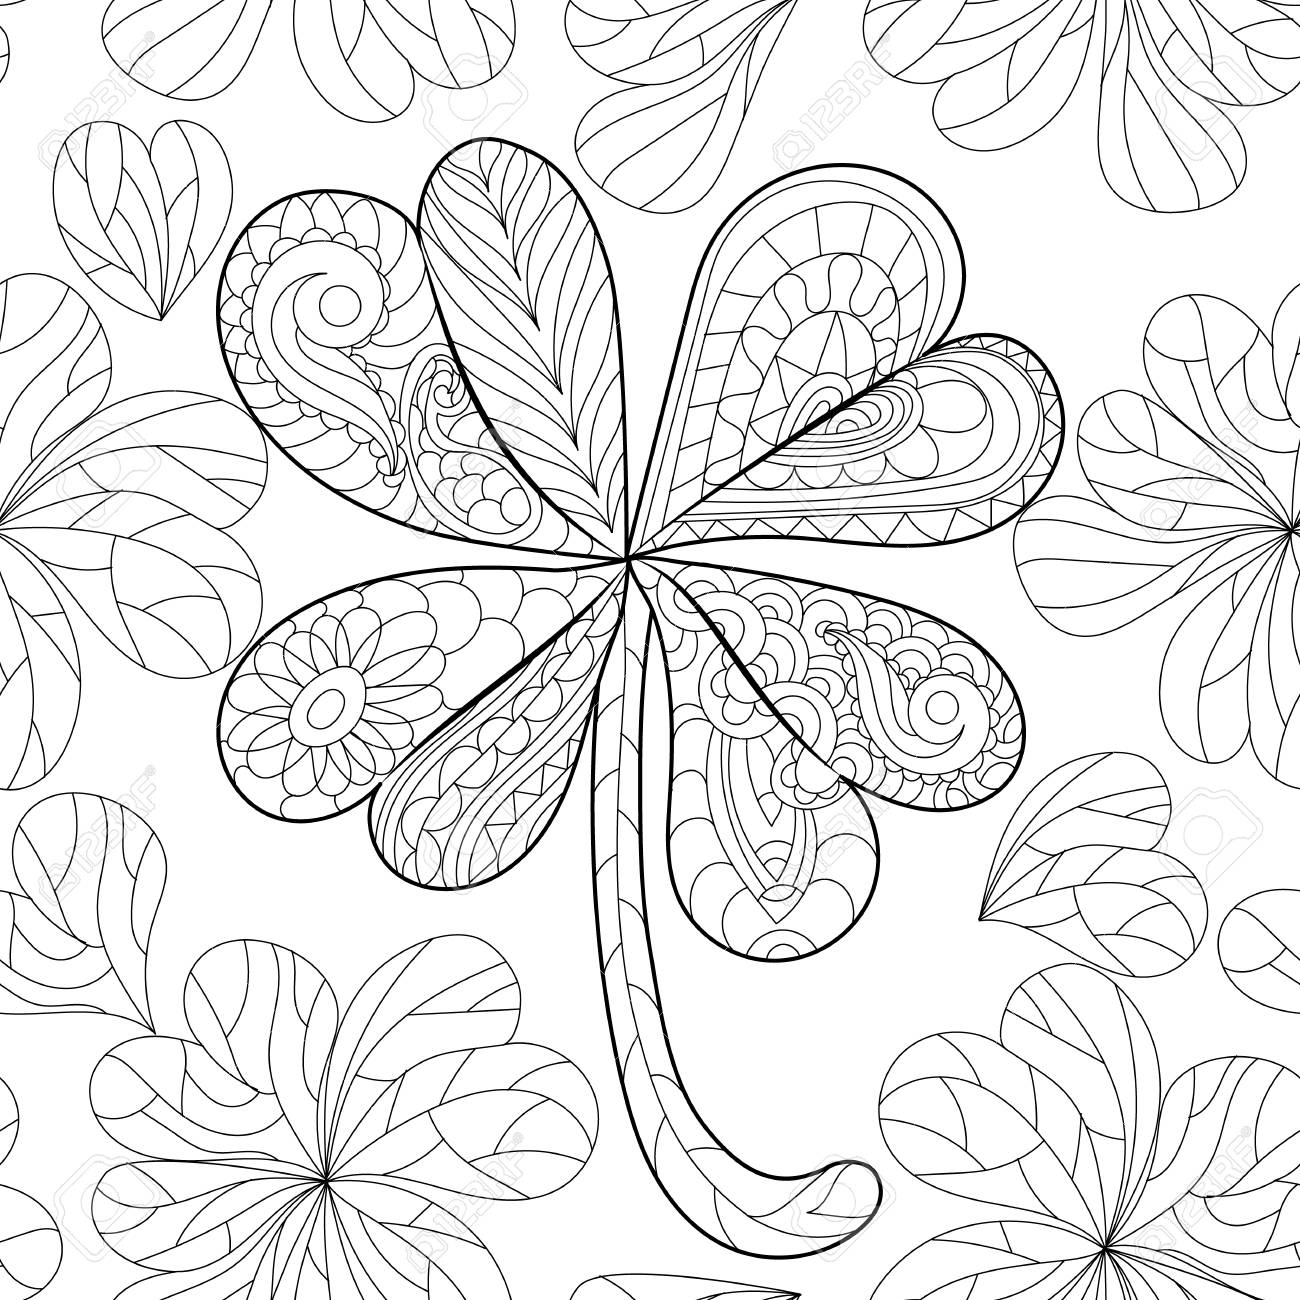 Coloring book clover shamrock on st patricks day for adults isolated pattern hand drawn vector sign luck anti stress seamless ethnic bohemian background vintage decorative elementindian motifs royalty free svg cliparts vectors